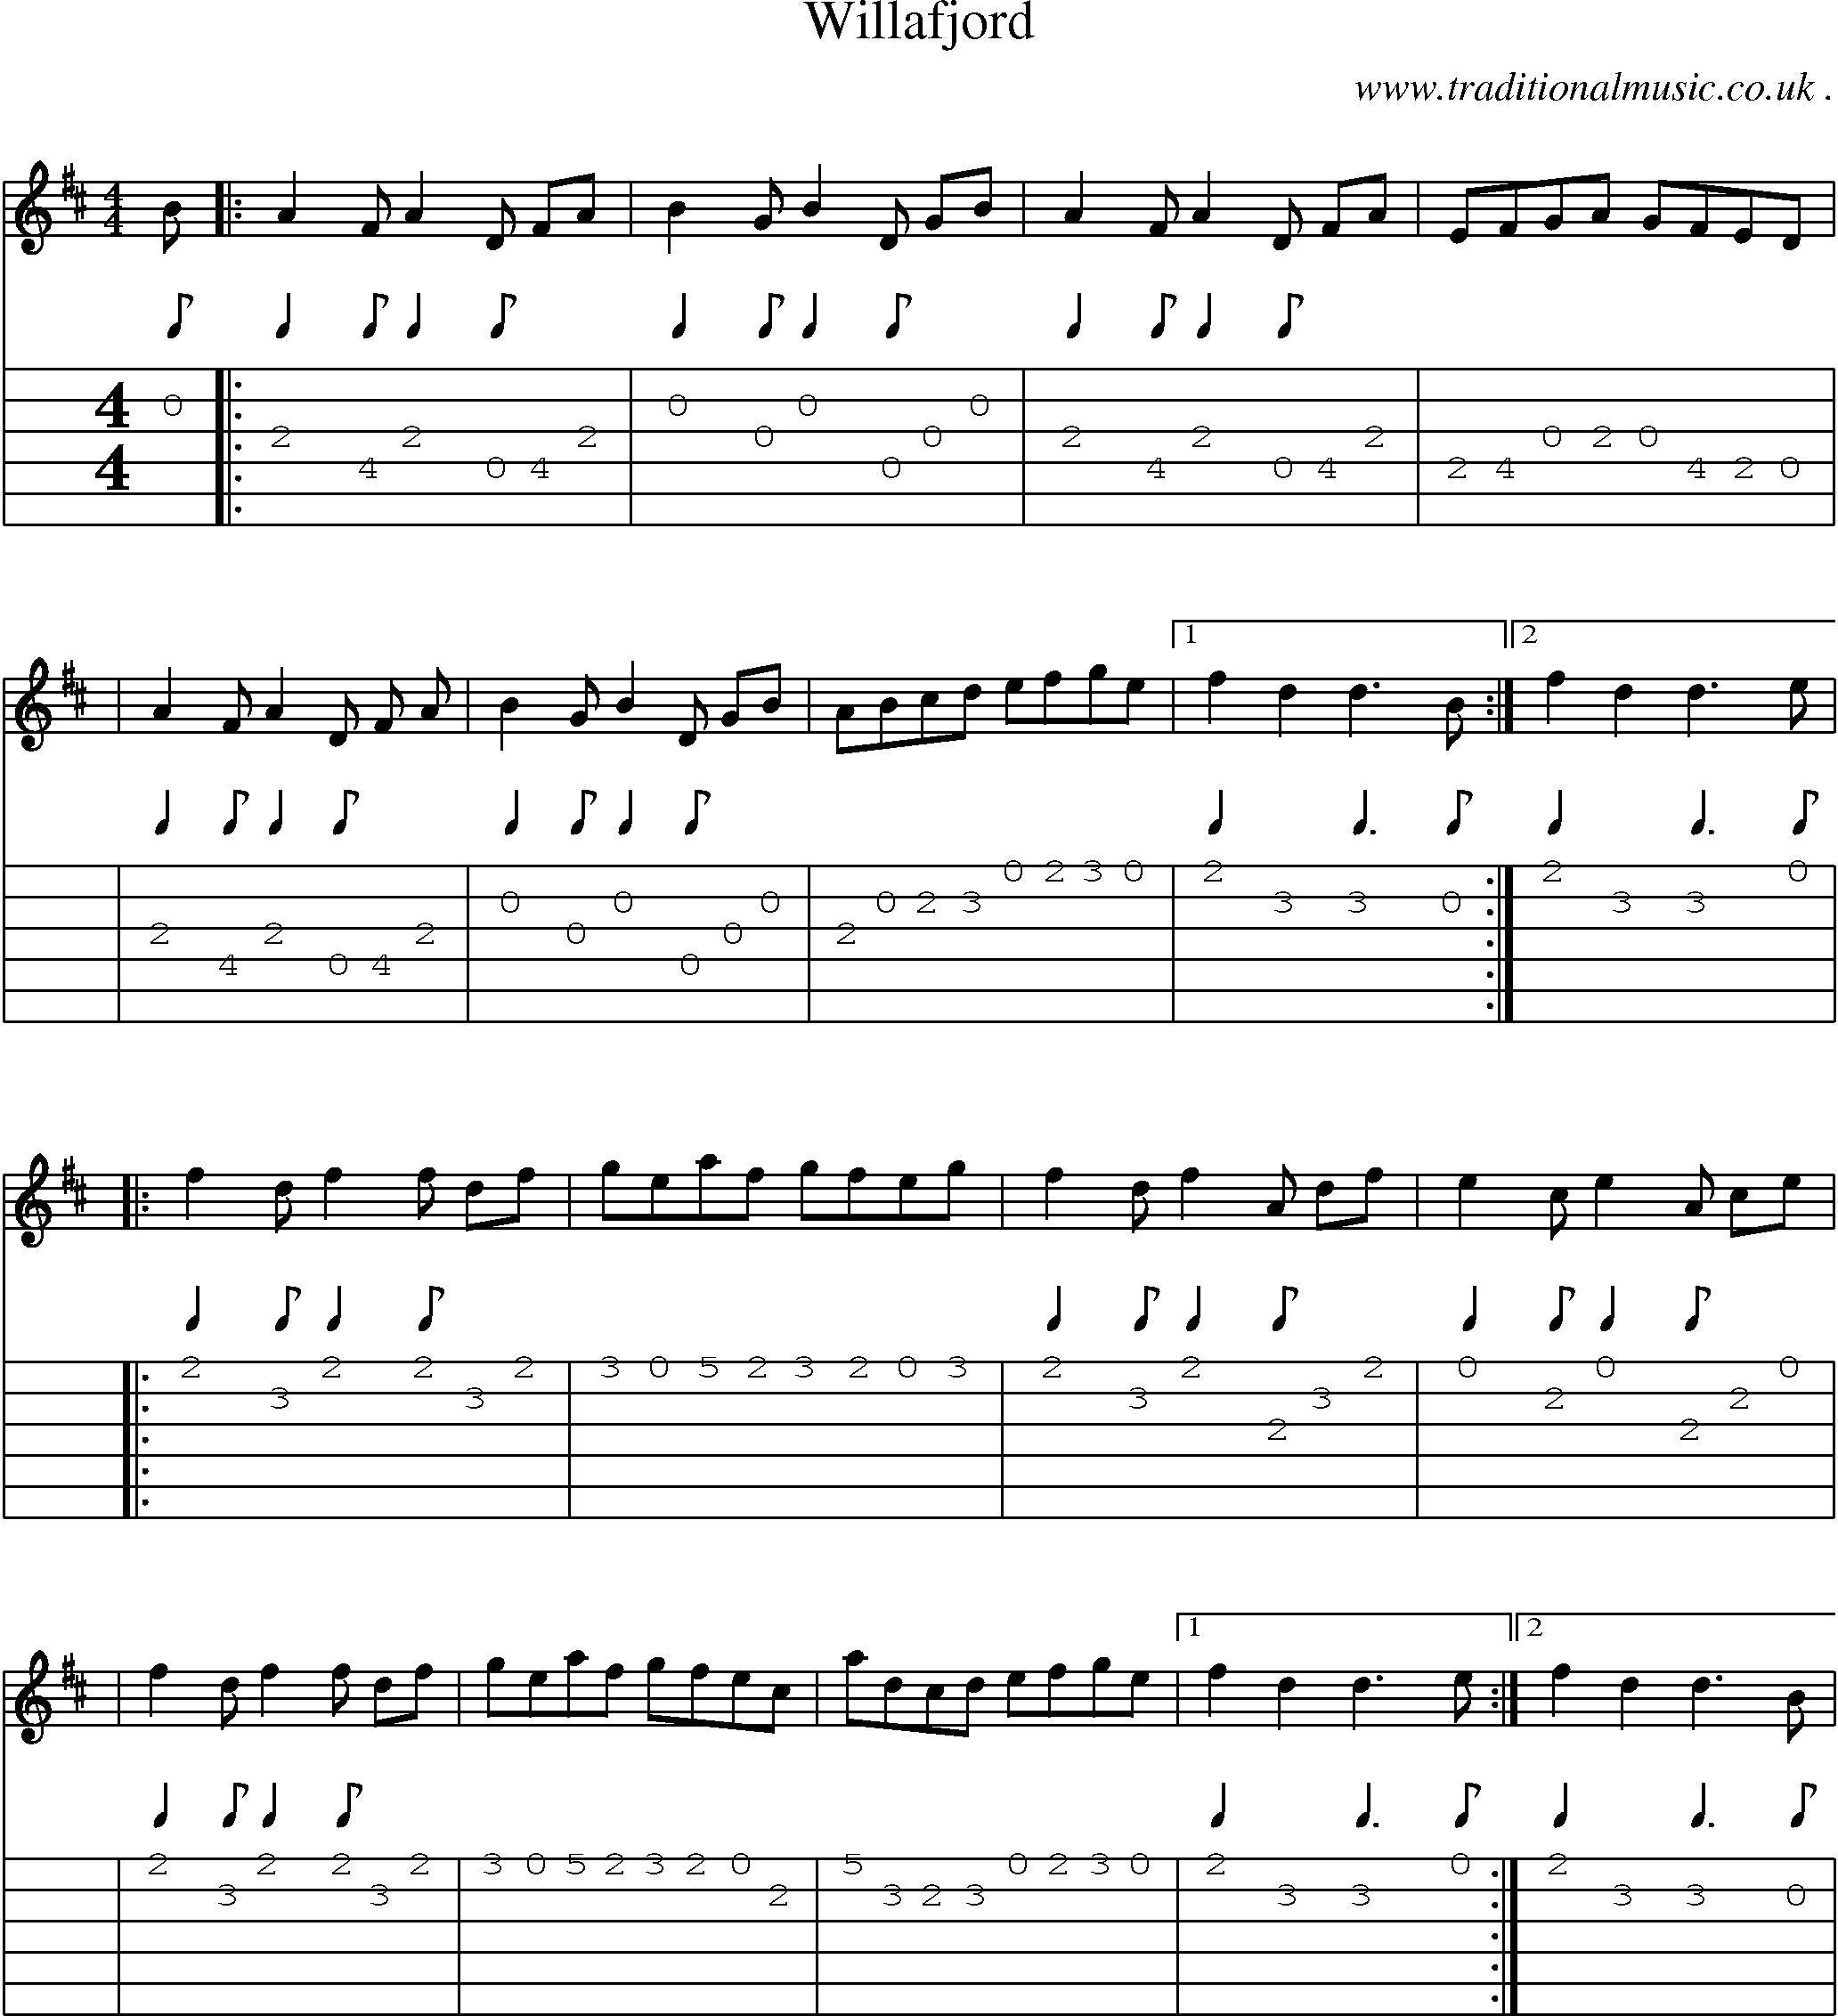 Sheet-Music and Guitar Tabs for Willafjord